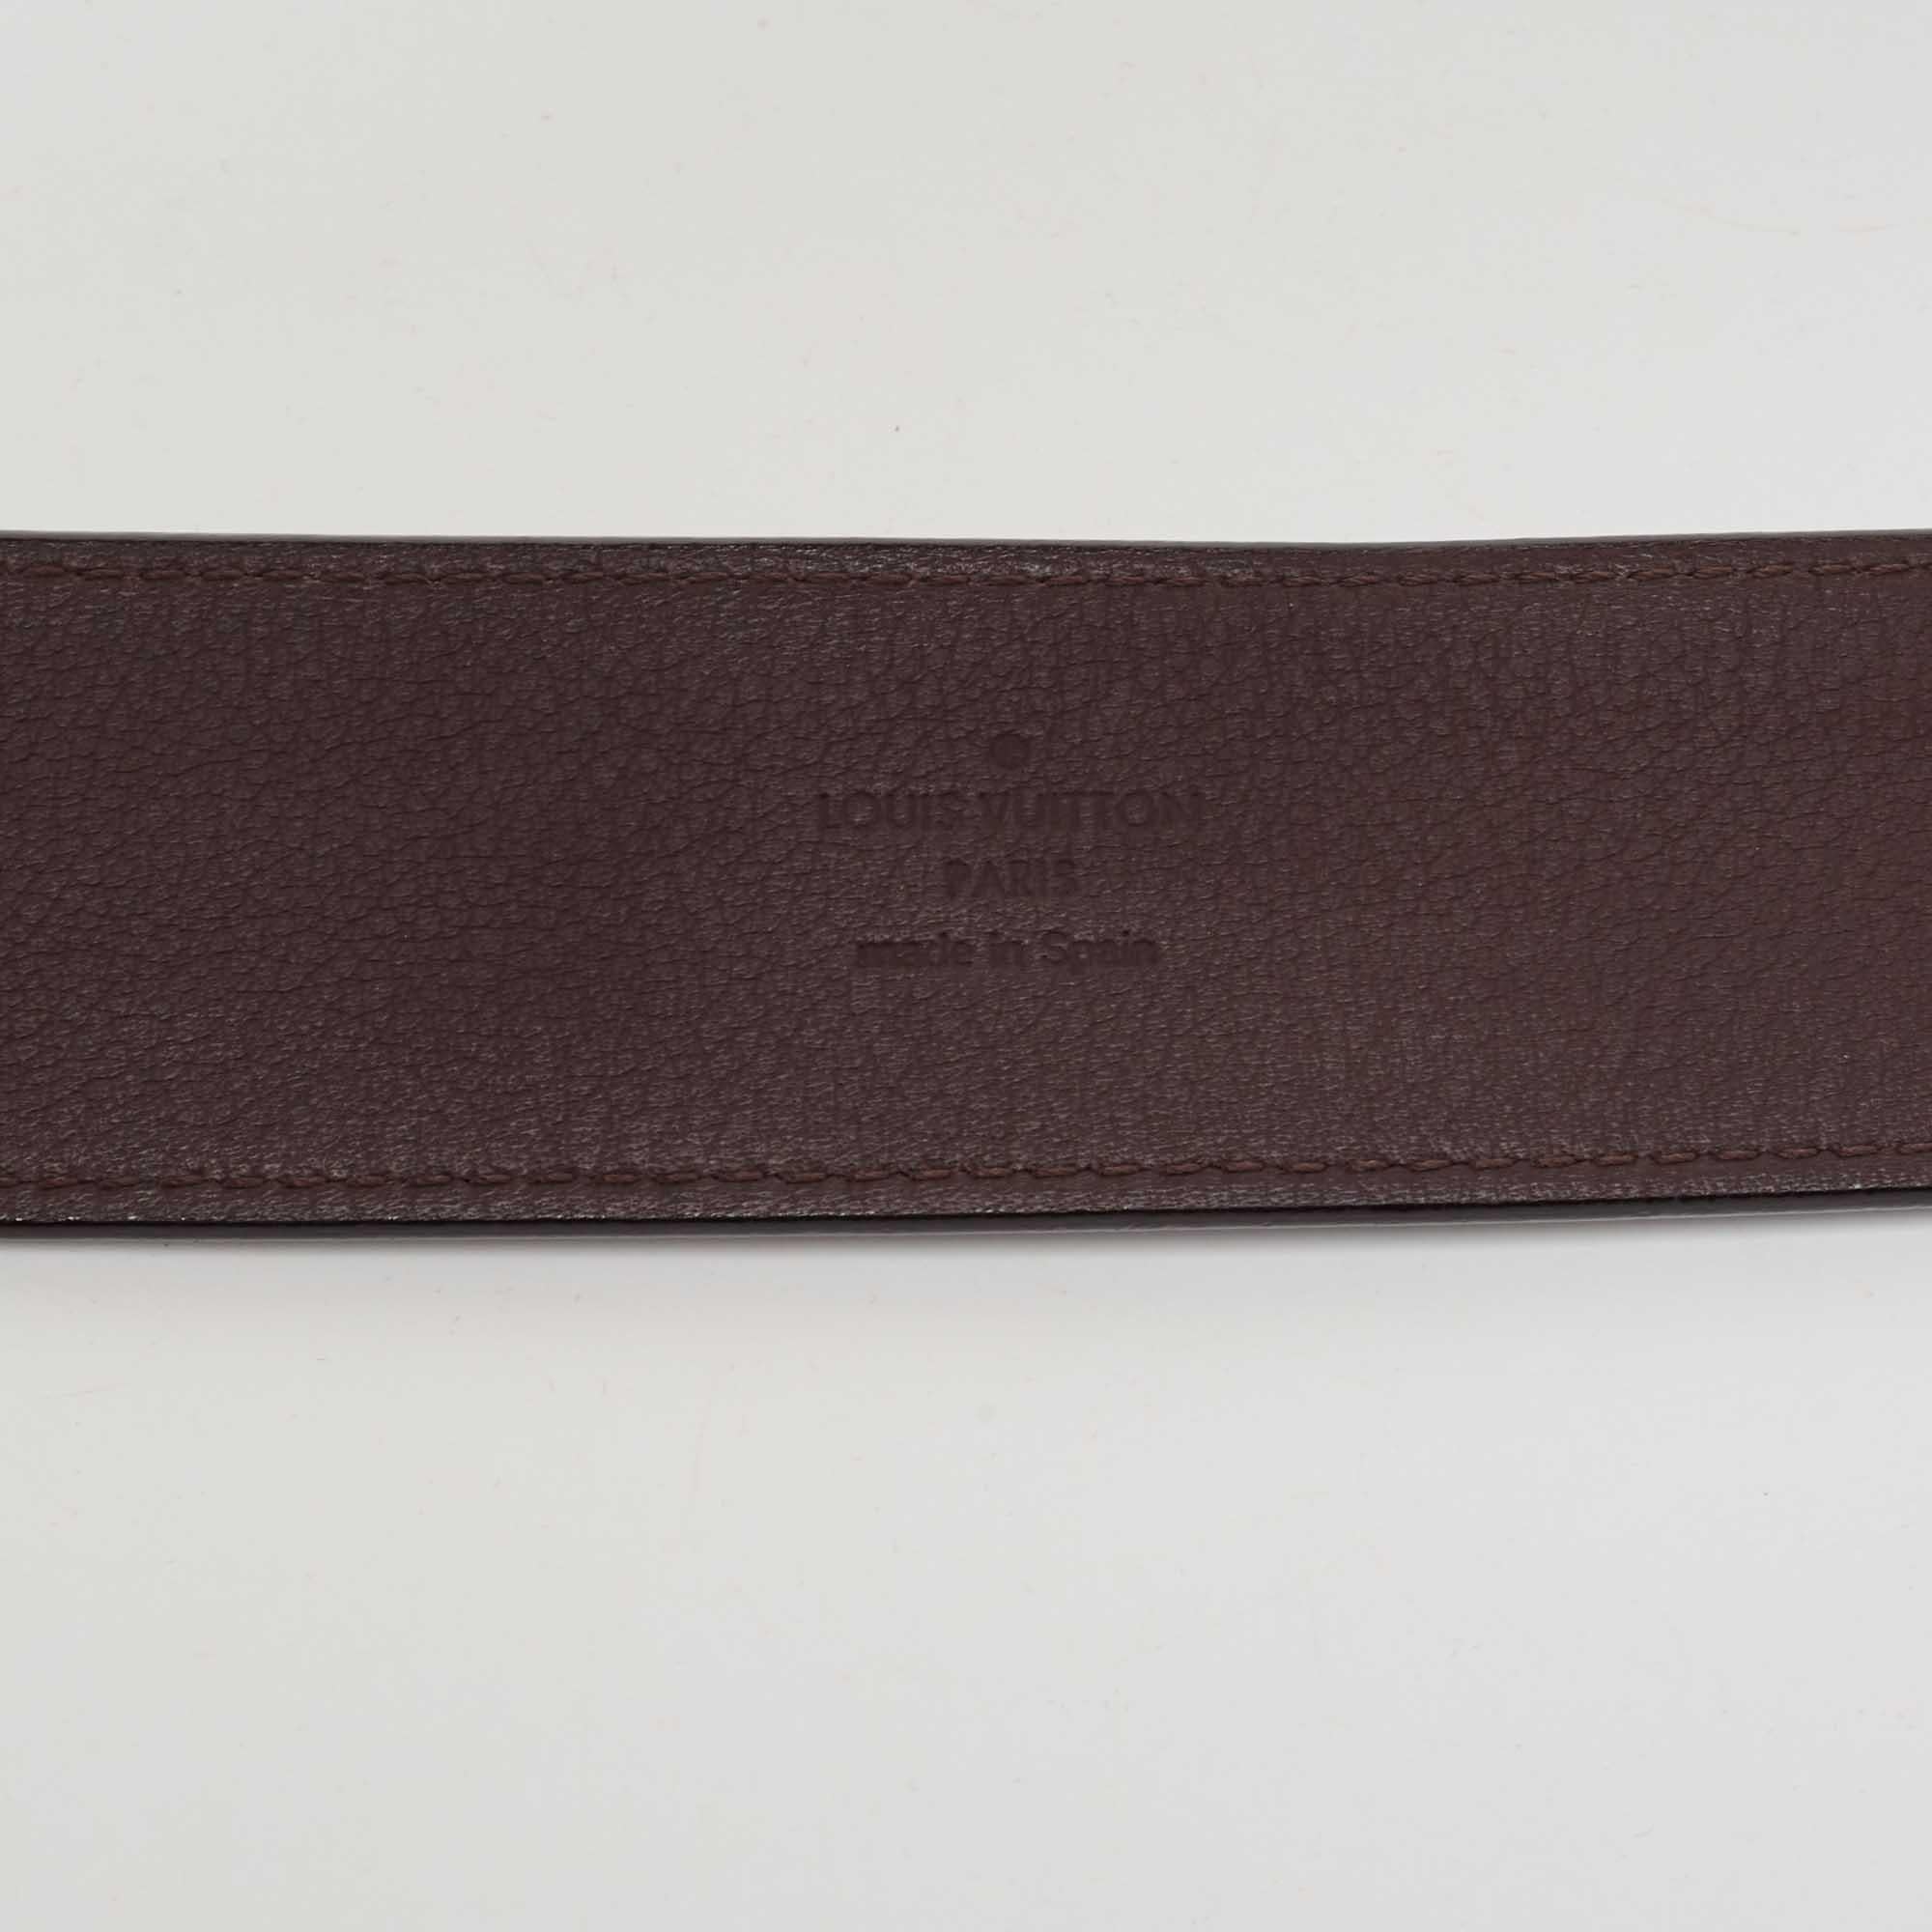 This waist belt from Louis Vuitton is simple in design but nevertheless quite appealing. Crafted using Amarante Vernis leather, this waist belt showcases a gold-toned LV Initiales accent on the front. It features a length of 90cm. This belt is